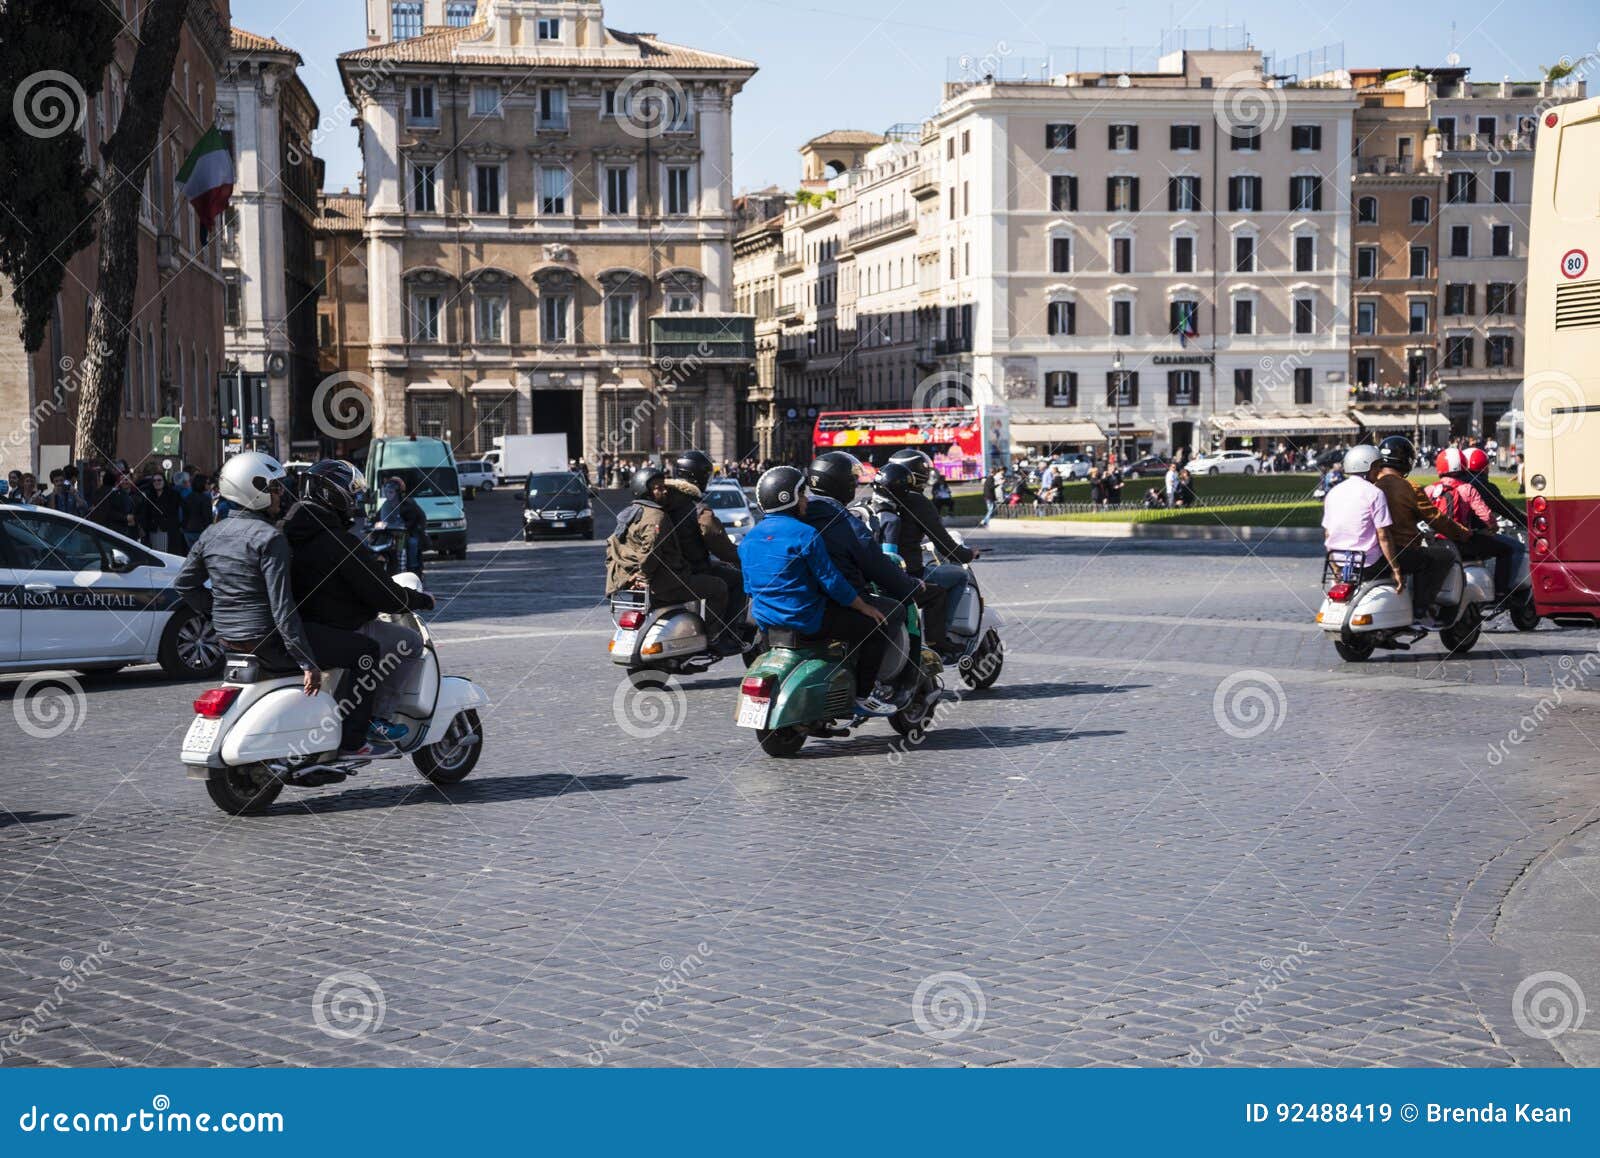 Jordbær politiker periode Scooter Rally of Over 200 Scooters through the City of Rome Italy Editorial  Stock Image - Image of rally, historic: 92488419